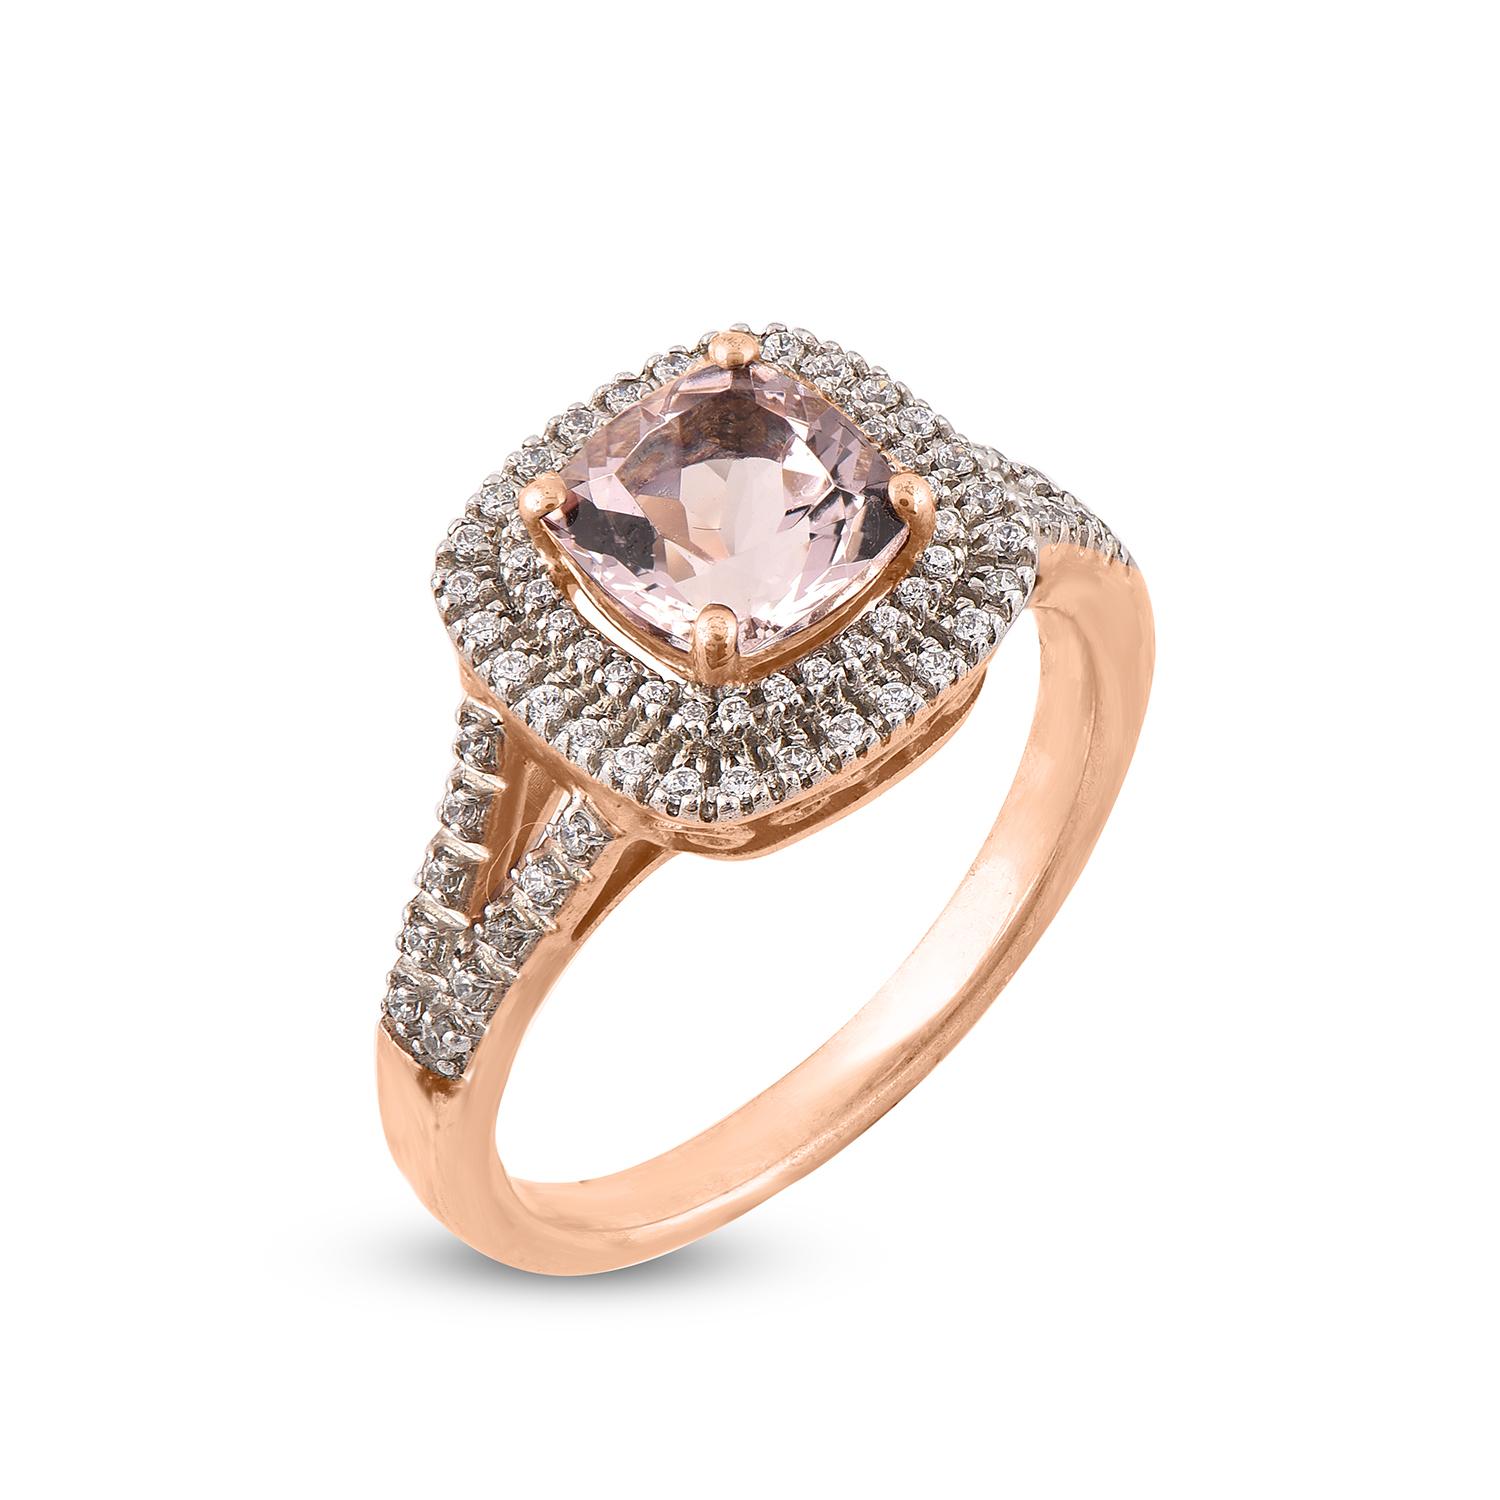 Handcrafted by our in-house experts in 14 karat rose gold and embellished with 80 diamonds and 1 Cushion cut 6mm morganite set in prong setting. The diamonds are graded HI color, I2 clarity. 
